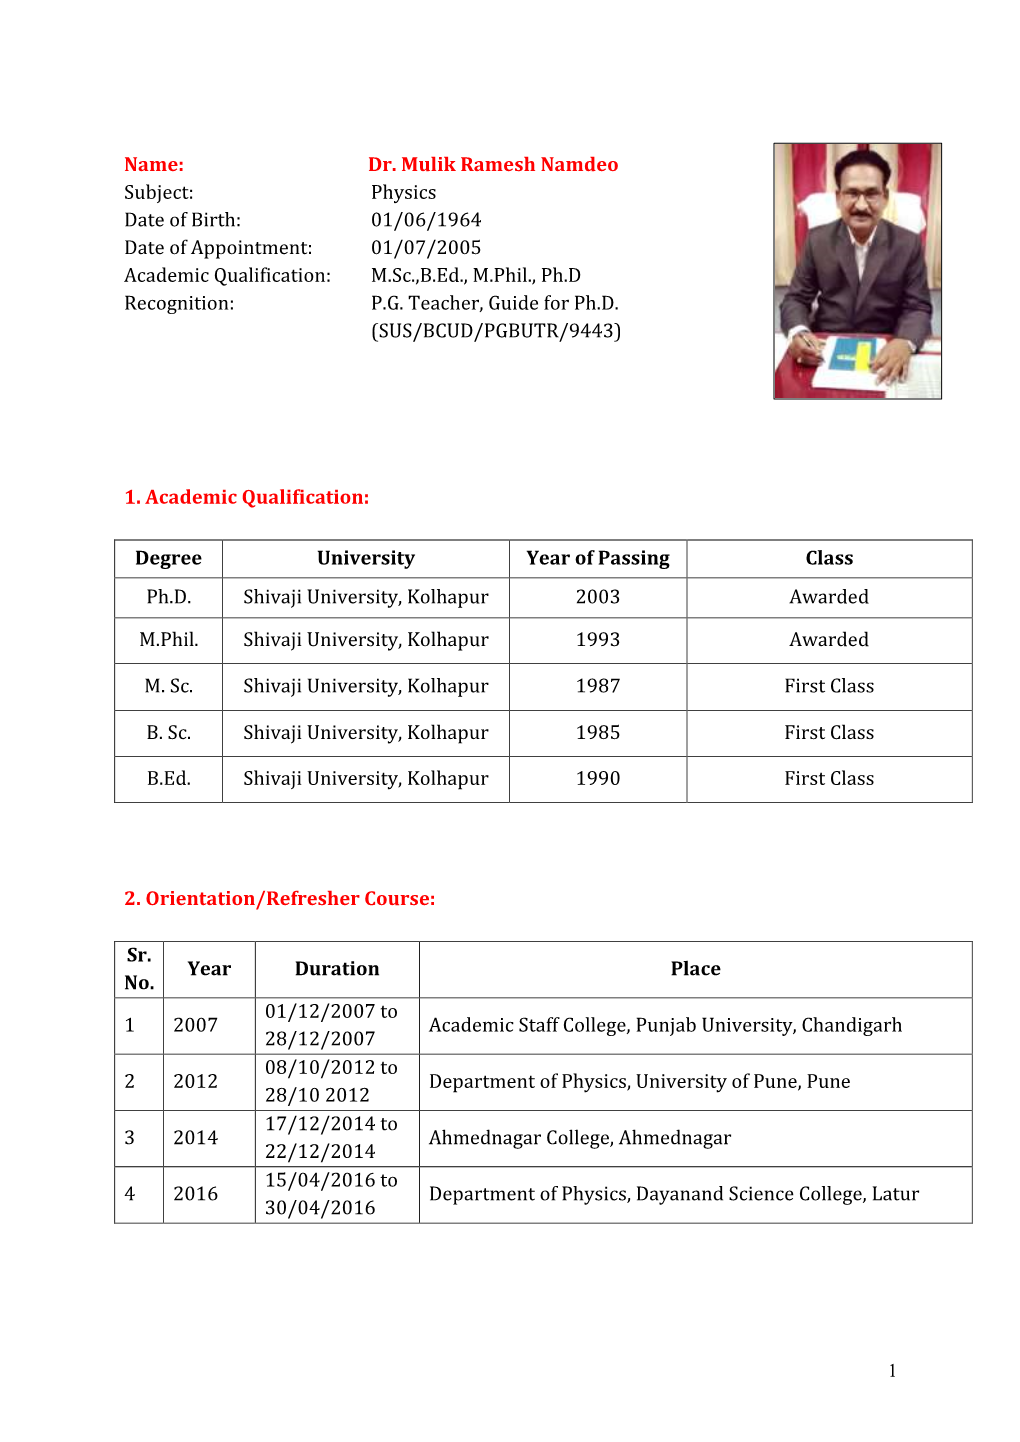 Dr. Mulik Ramesh Namdeo Subject: Physics Date of Birth: 01/06/1964 Date of Appointment: 01/07/2005 Academic Qualification: M.Sc.,B.Ed., M.Phil., Ph.D Recognition: P.G